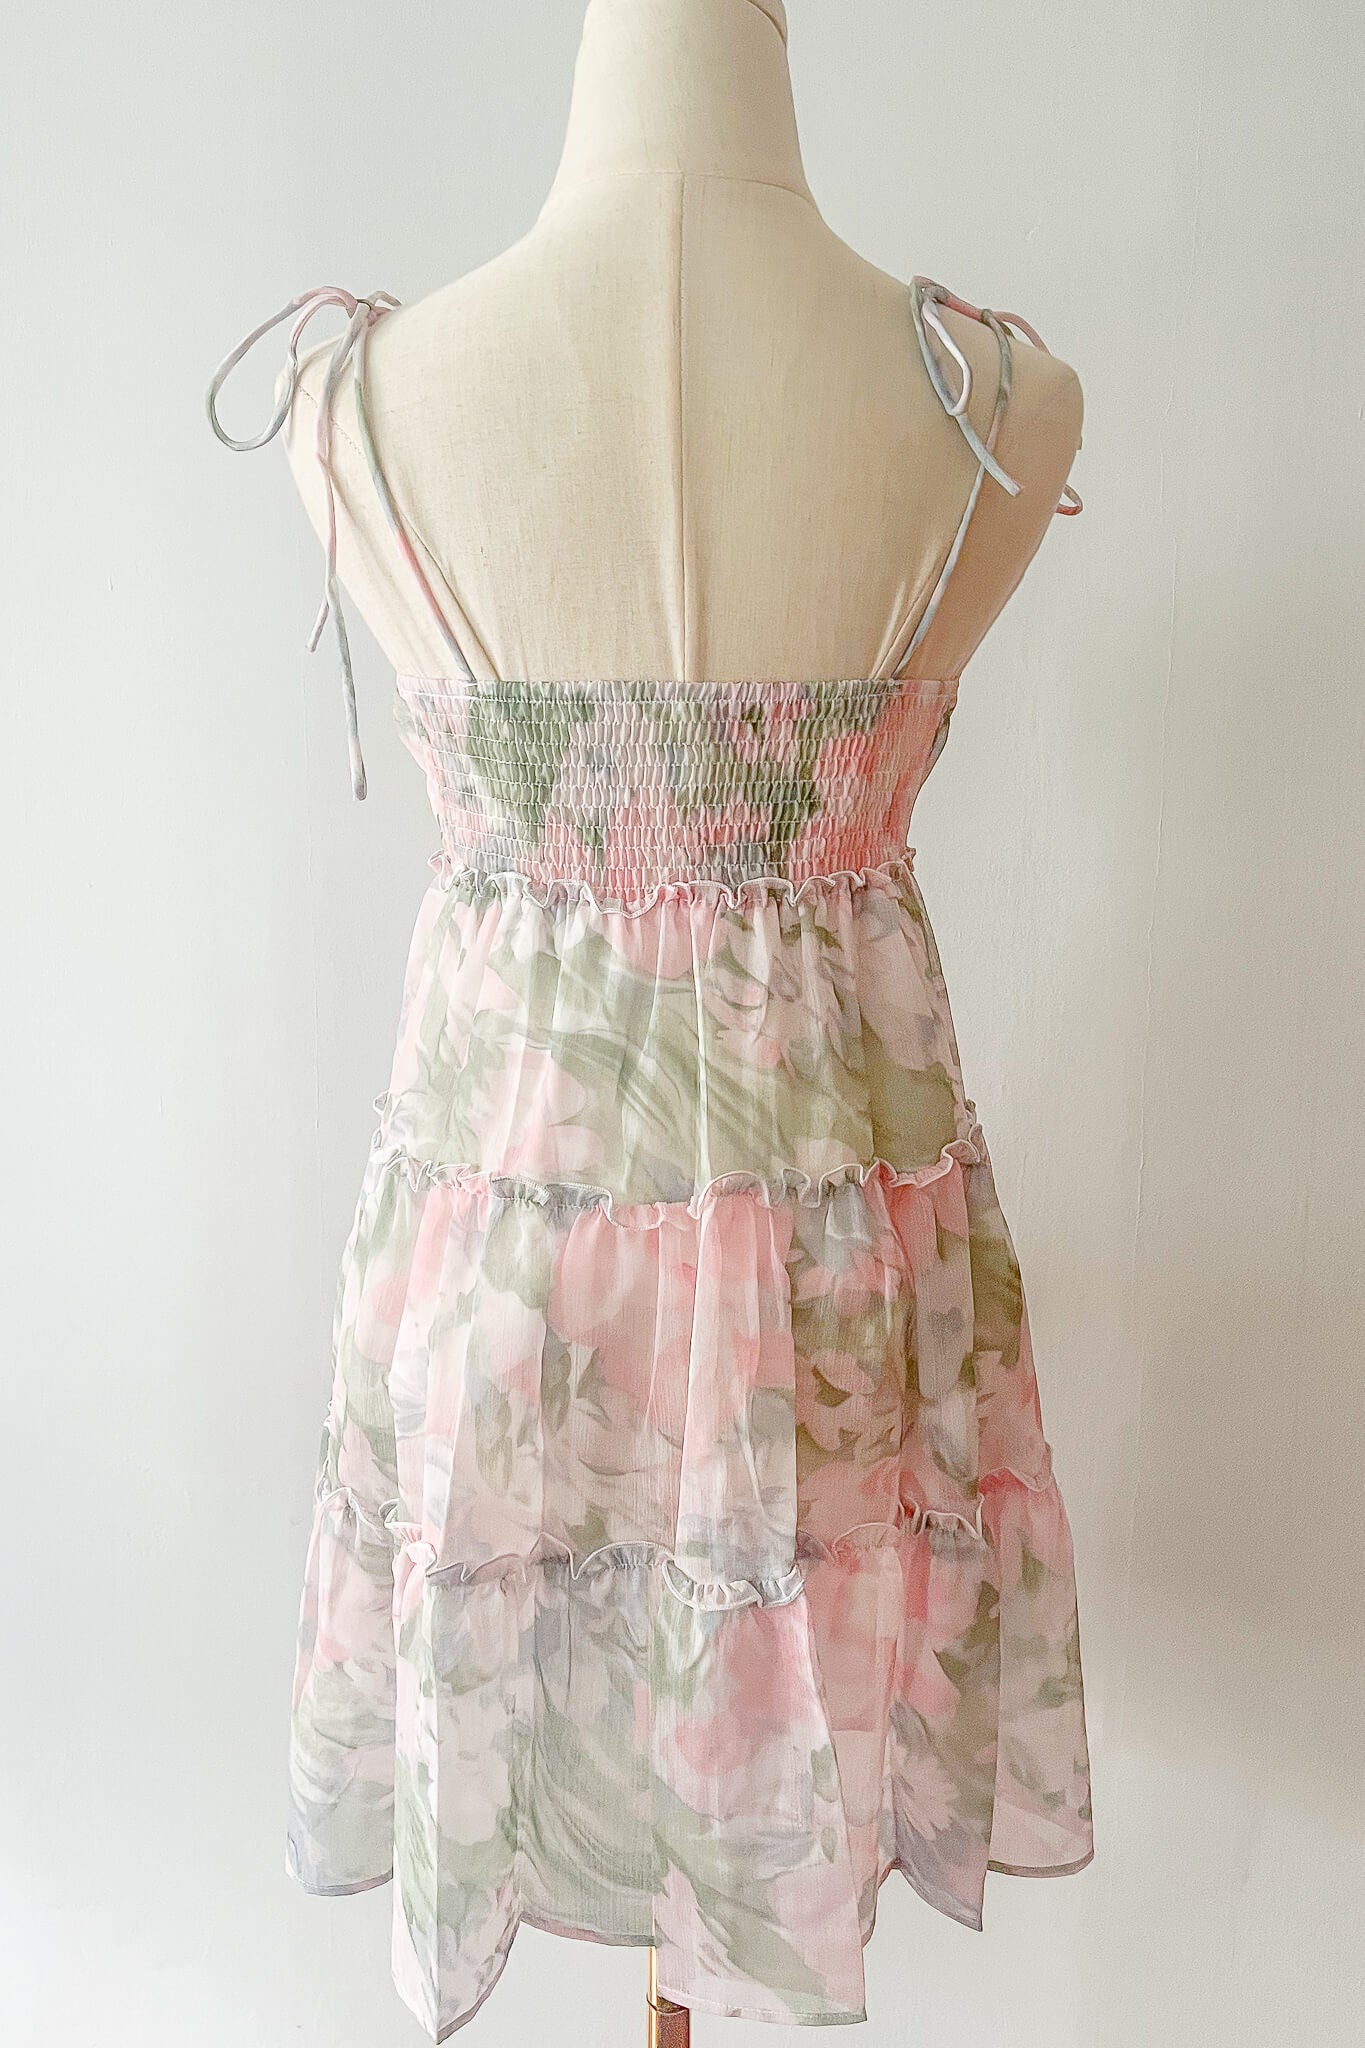 Sweet pink babydoll tier dress with self-tie adjustable straps, perfect for summer